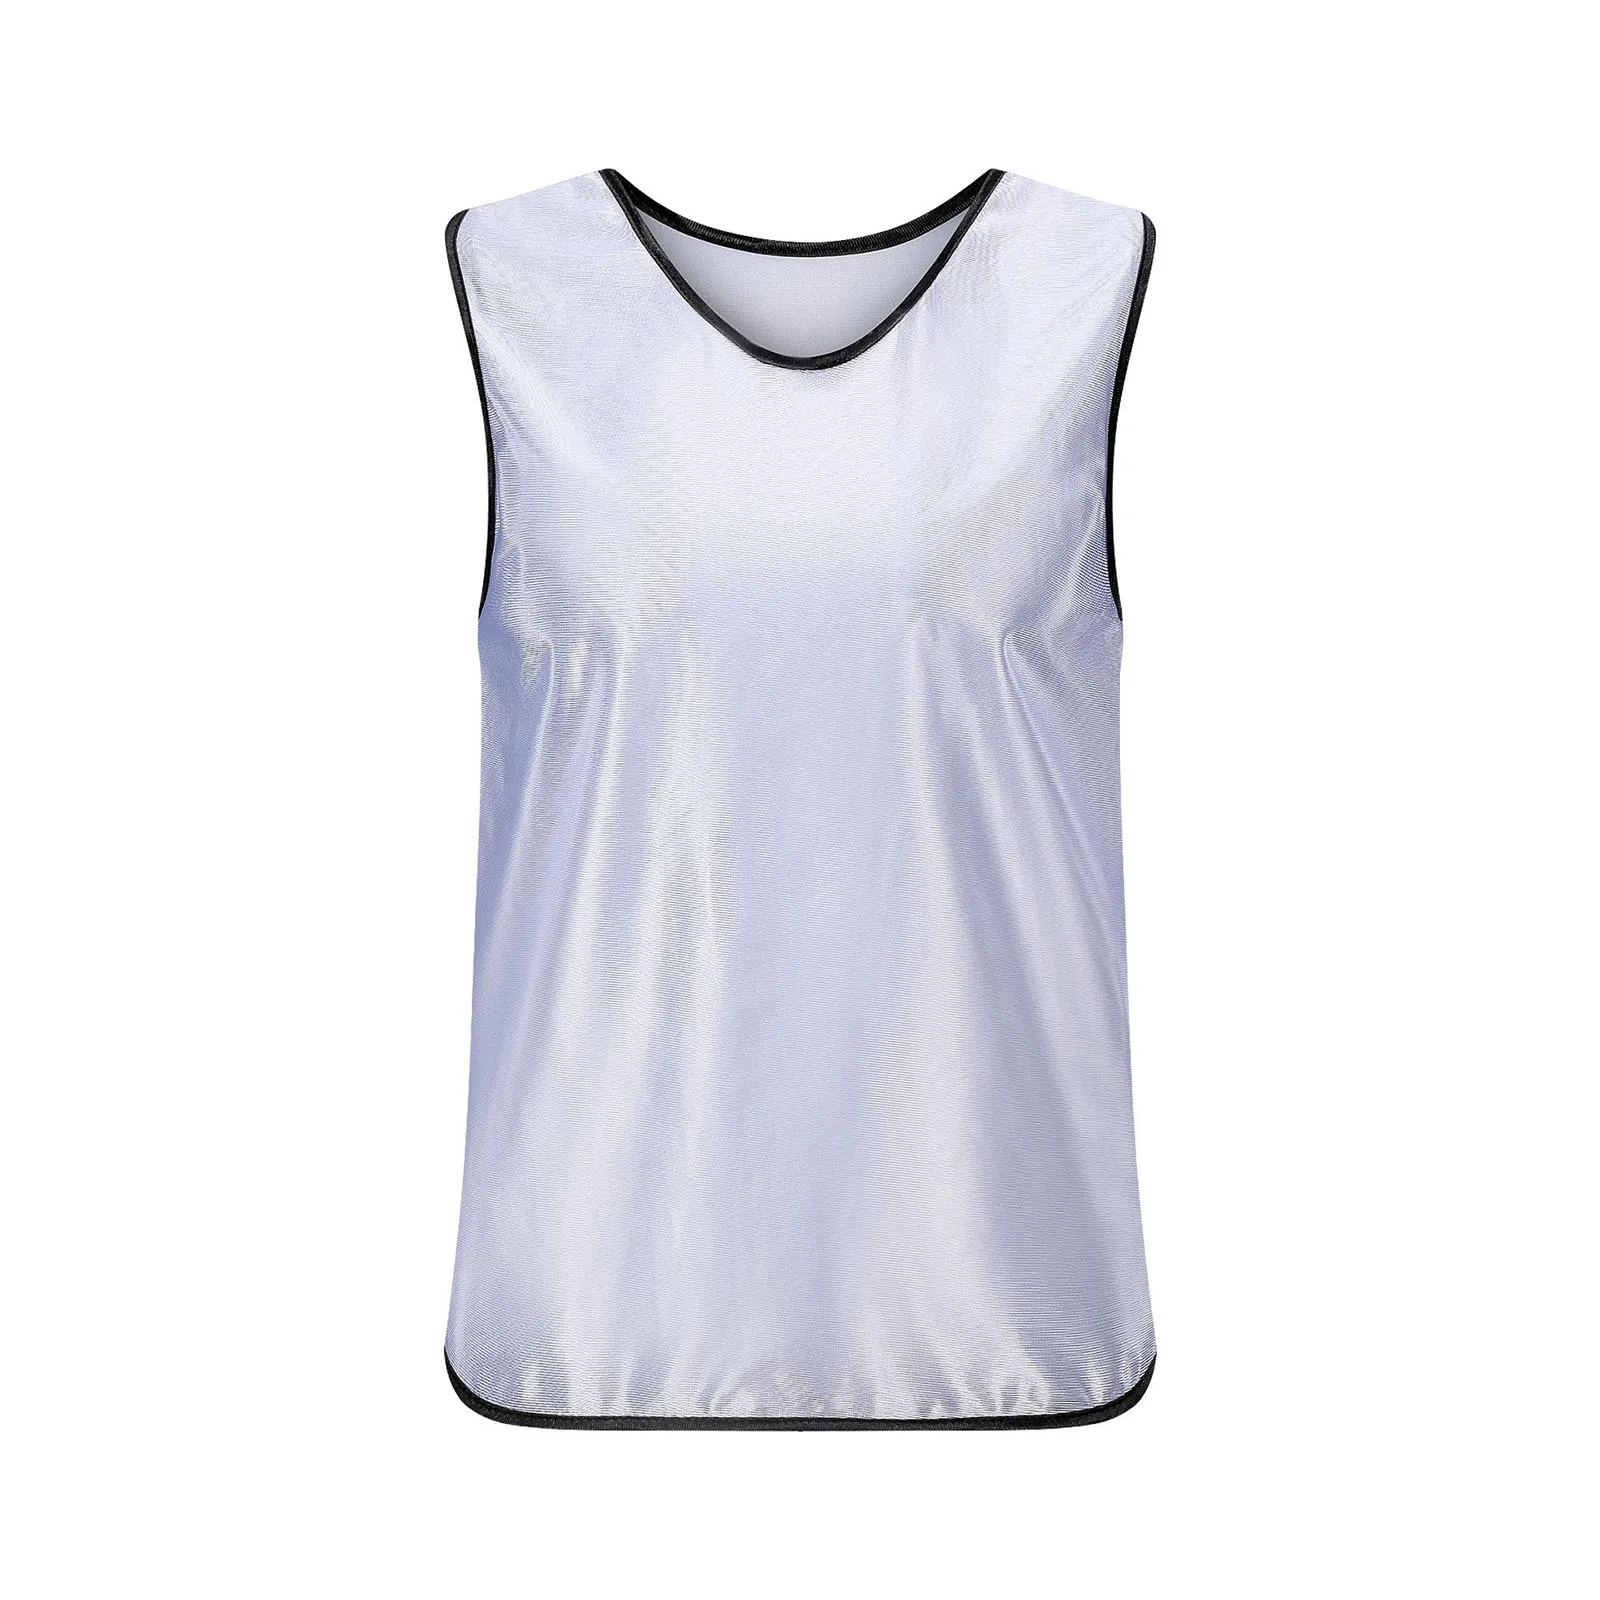 

Jerseys Football Vest 40x56cm Basketball Jersey Breathable Comfortable Fast Drying Football Vest Practice Vests